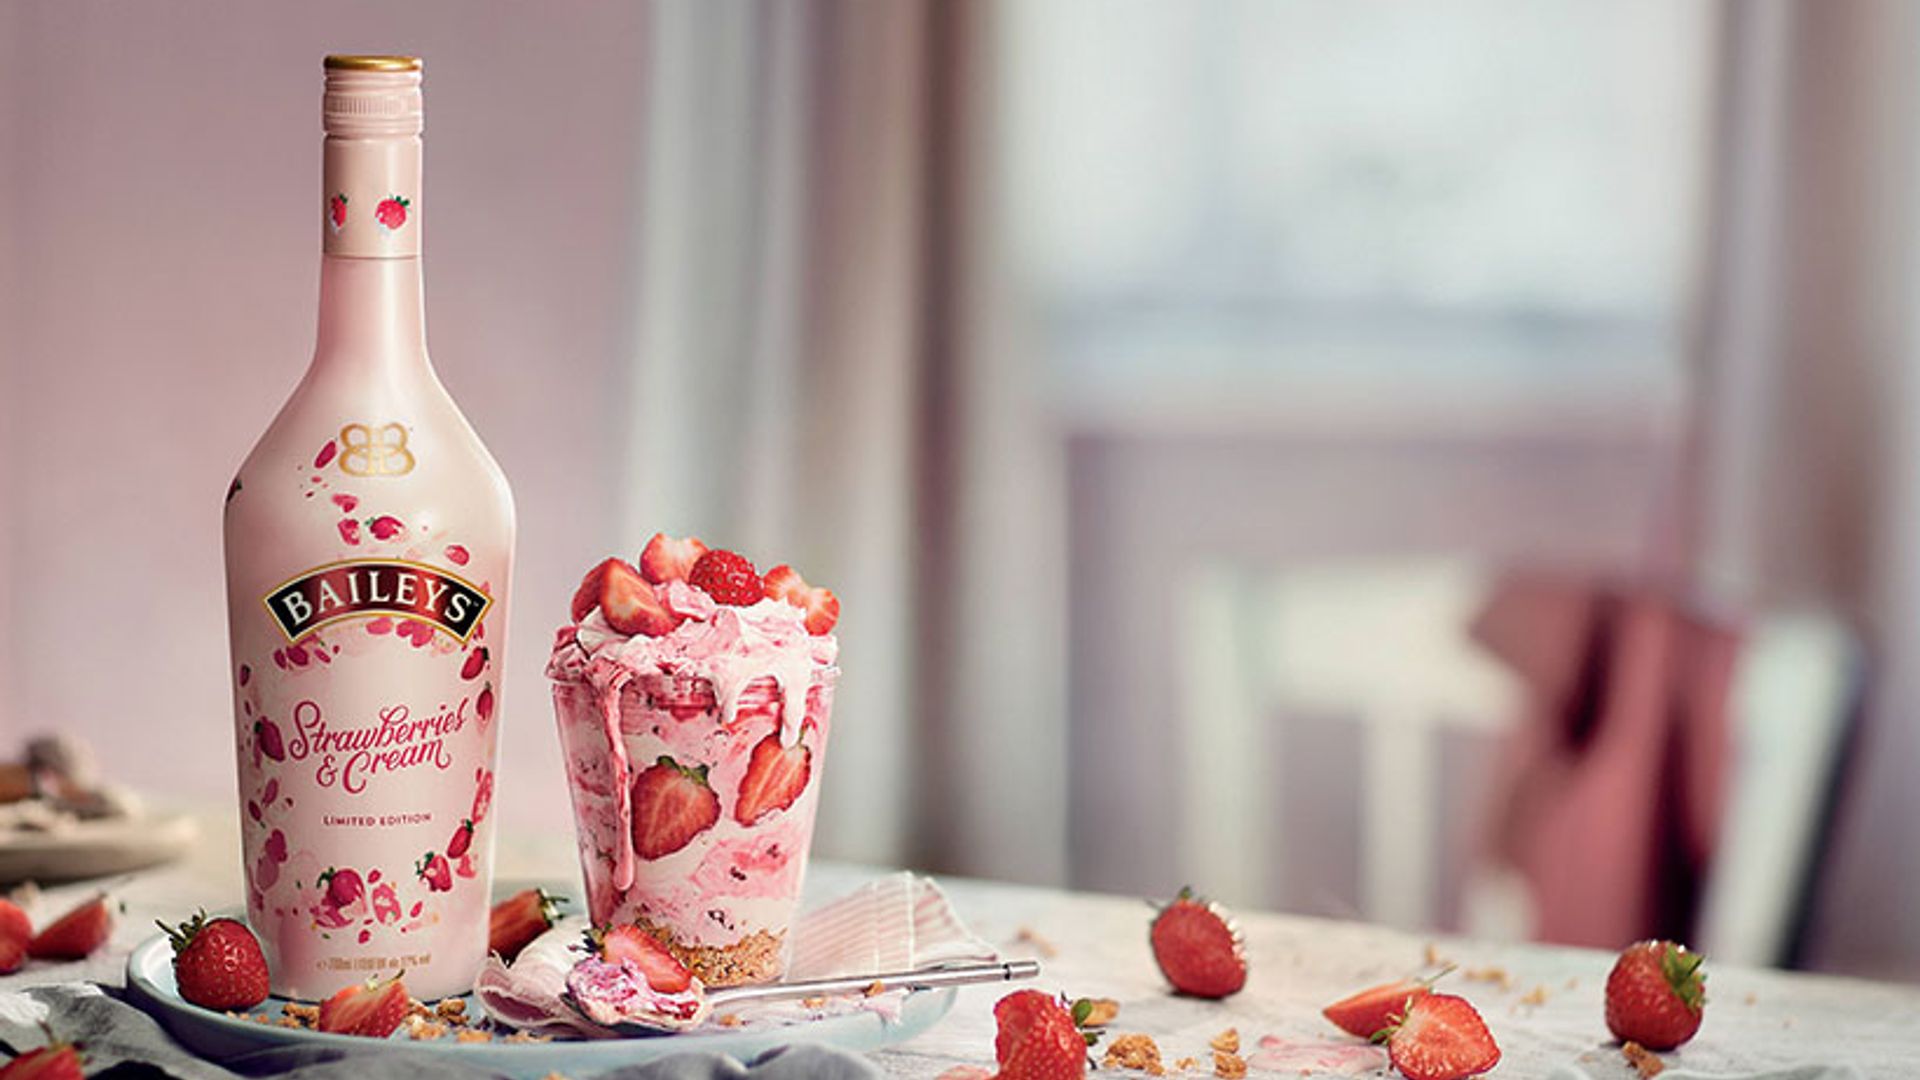 Wimbledon fans rejoice: there is now a strawberries and cream BAILEYS